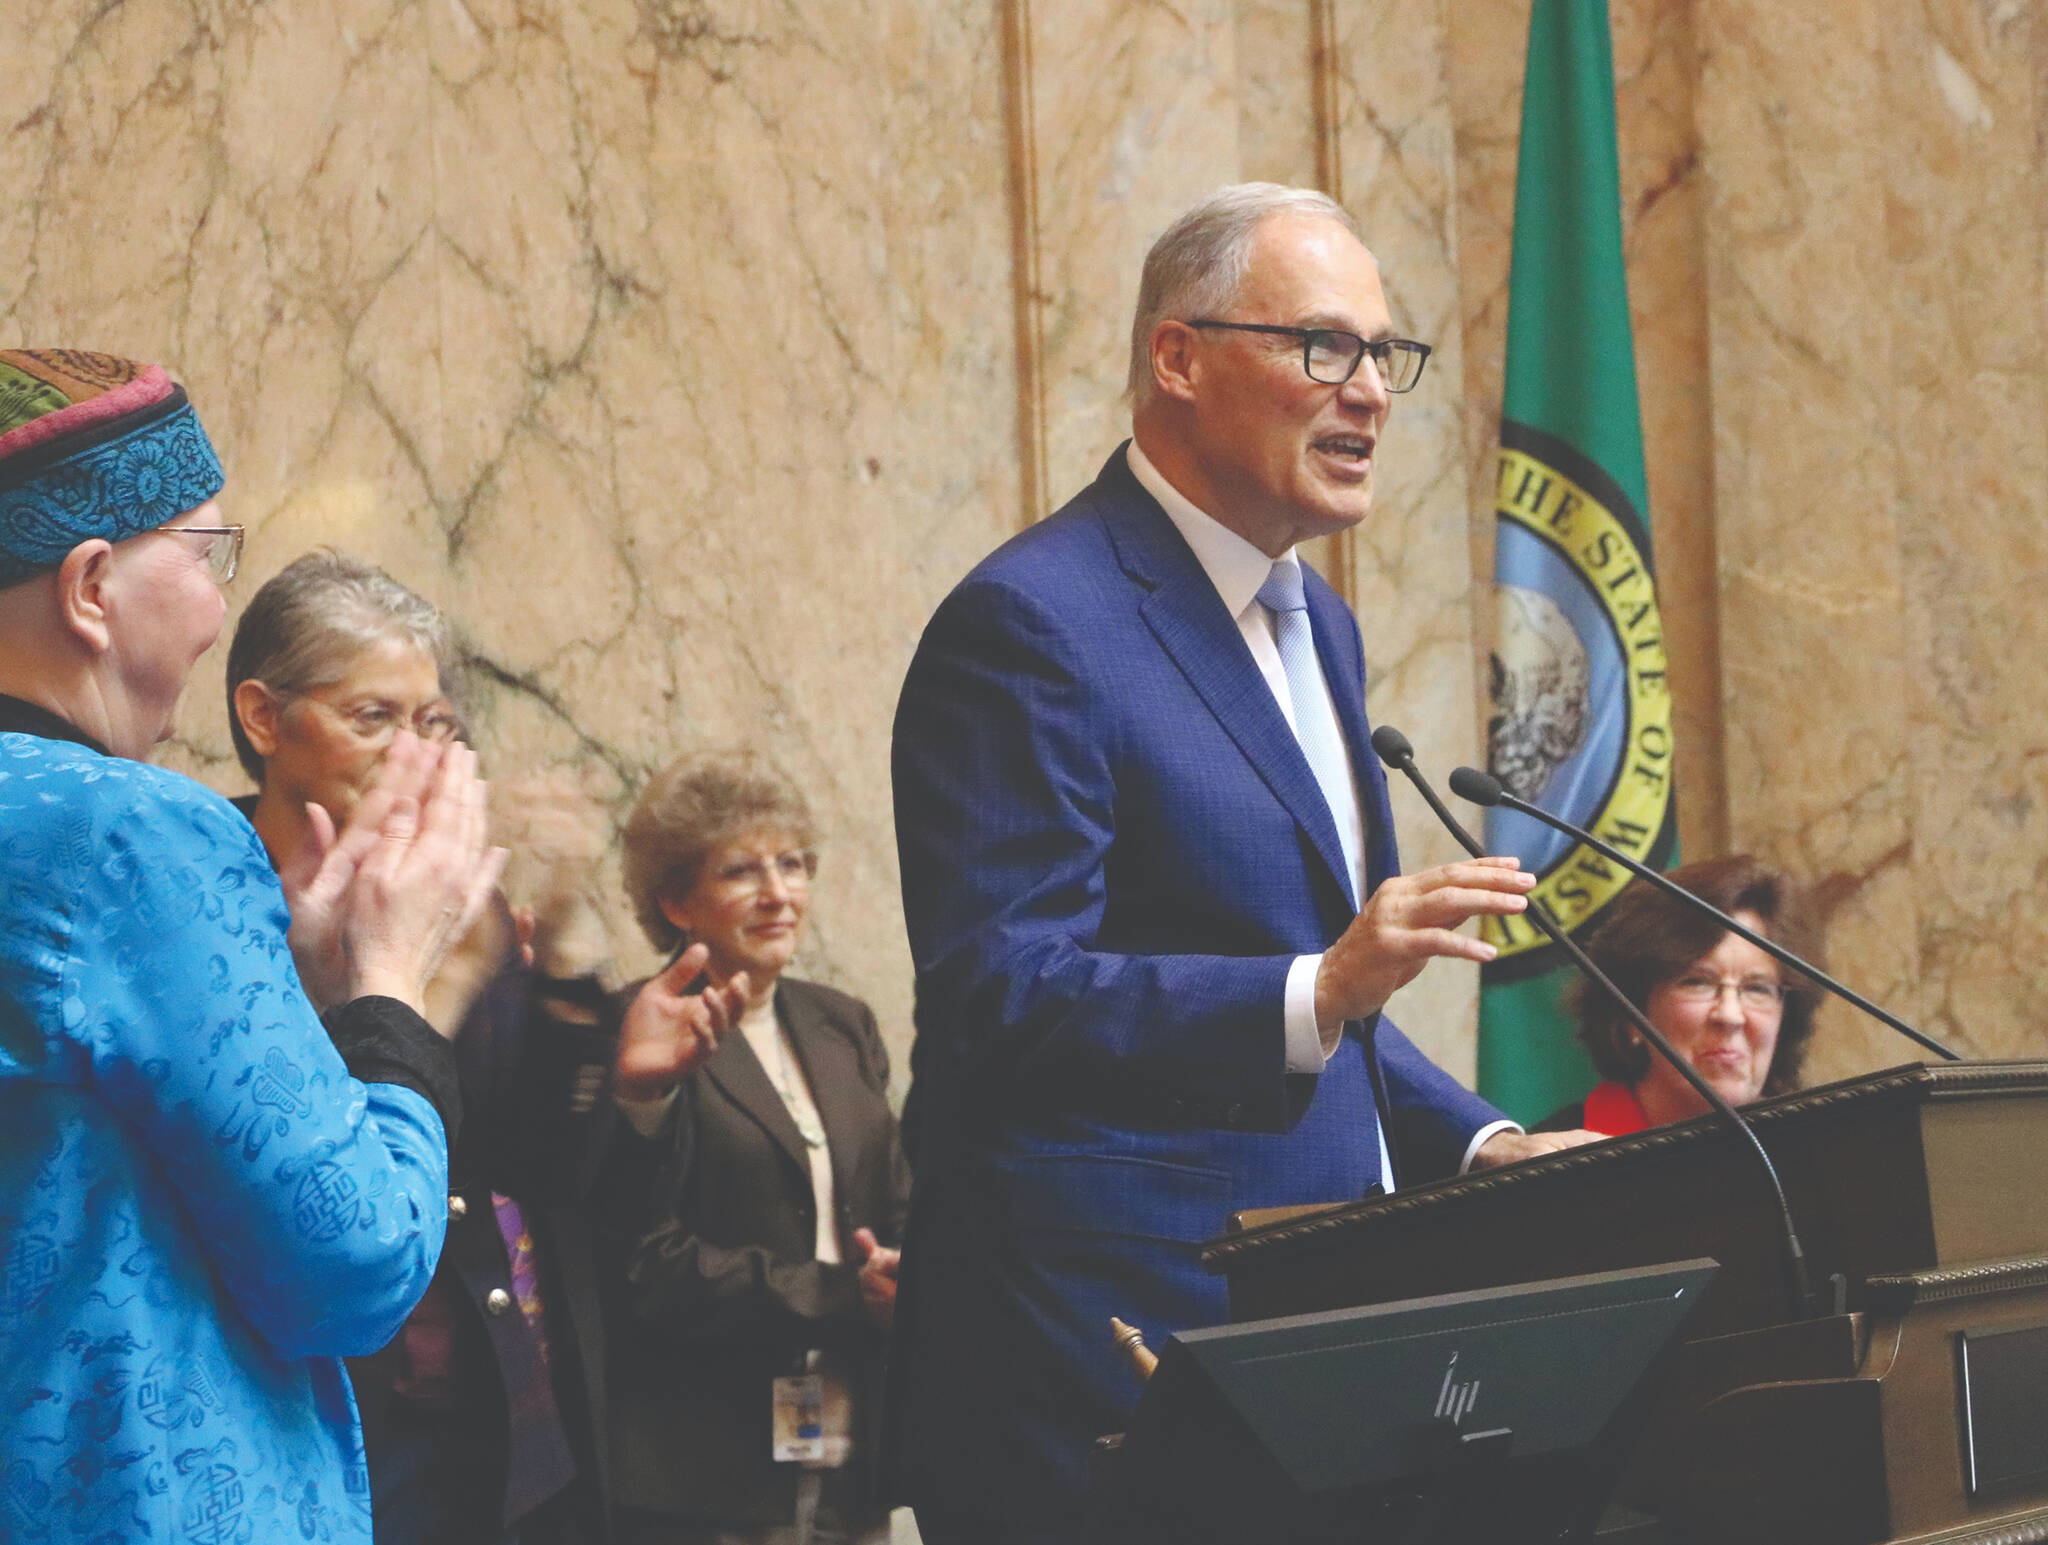 Photo by Aspen Anderson, WNPA Foundation
Entering his final year in office, Gov. Jay Inslee called for action on several fronts in his annual State of the State address to a joint session of the state Legislature.